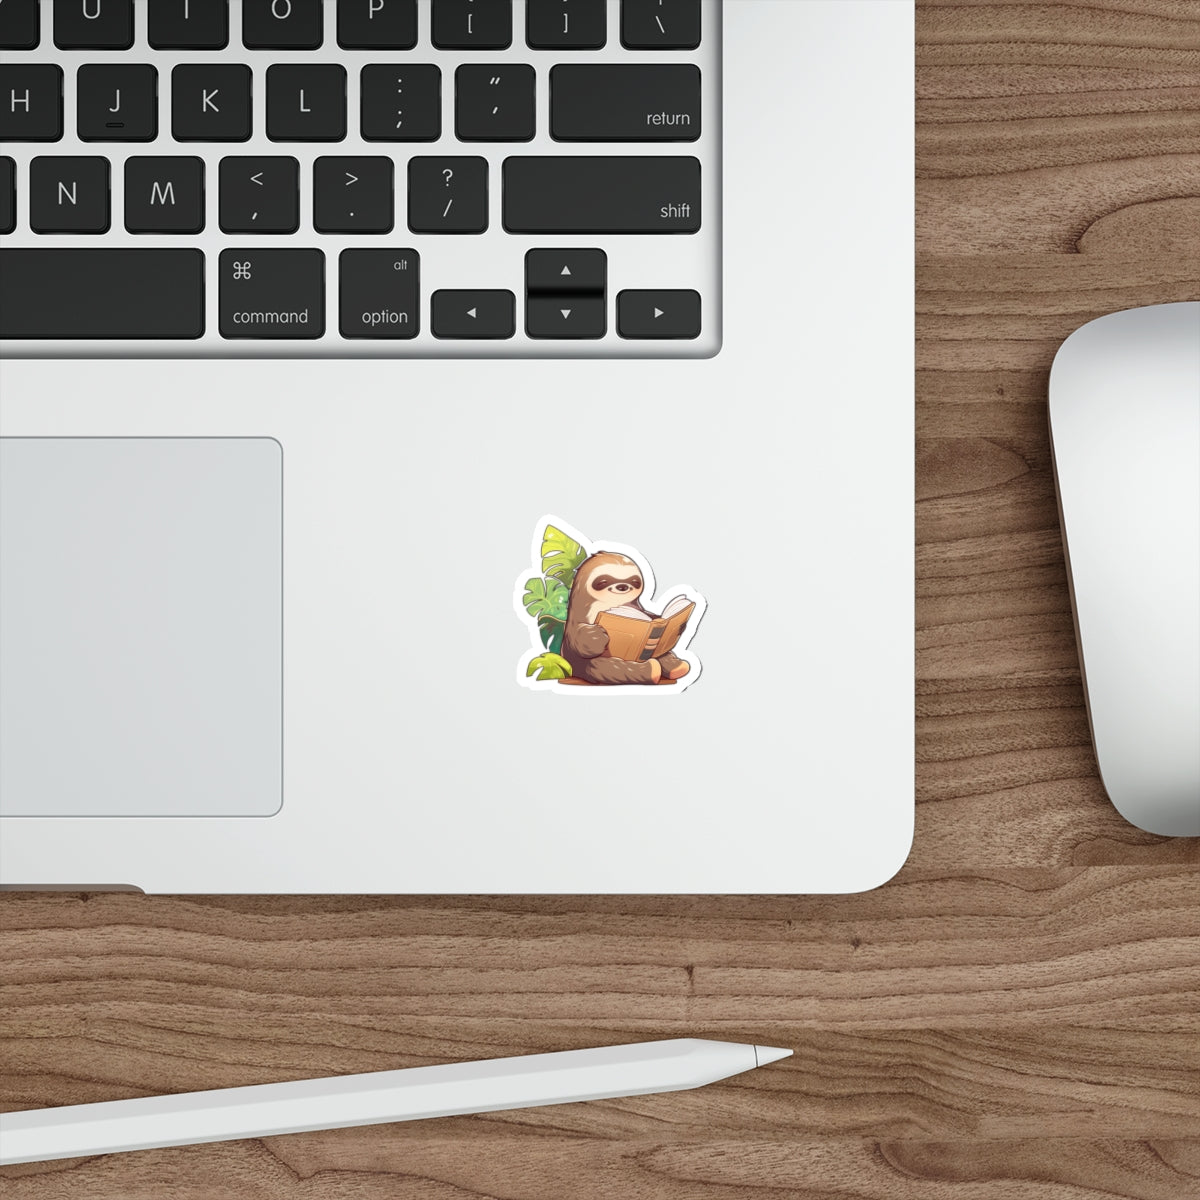 Sloth Sticker + $10 toward new features at Shepherd.com